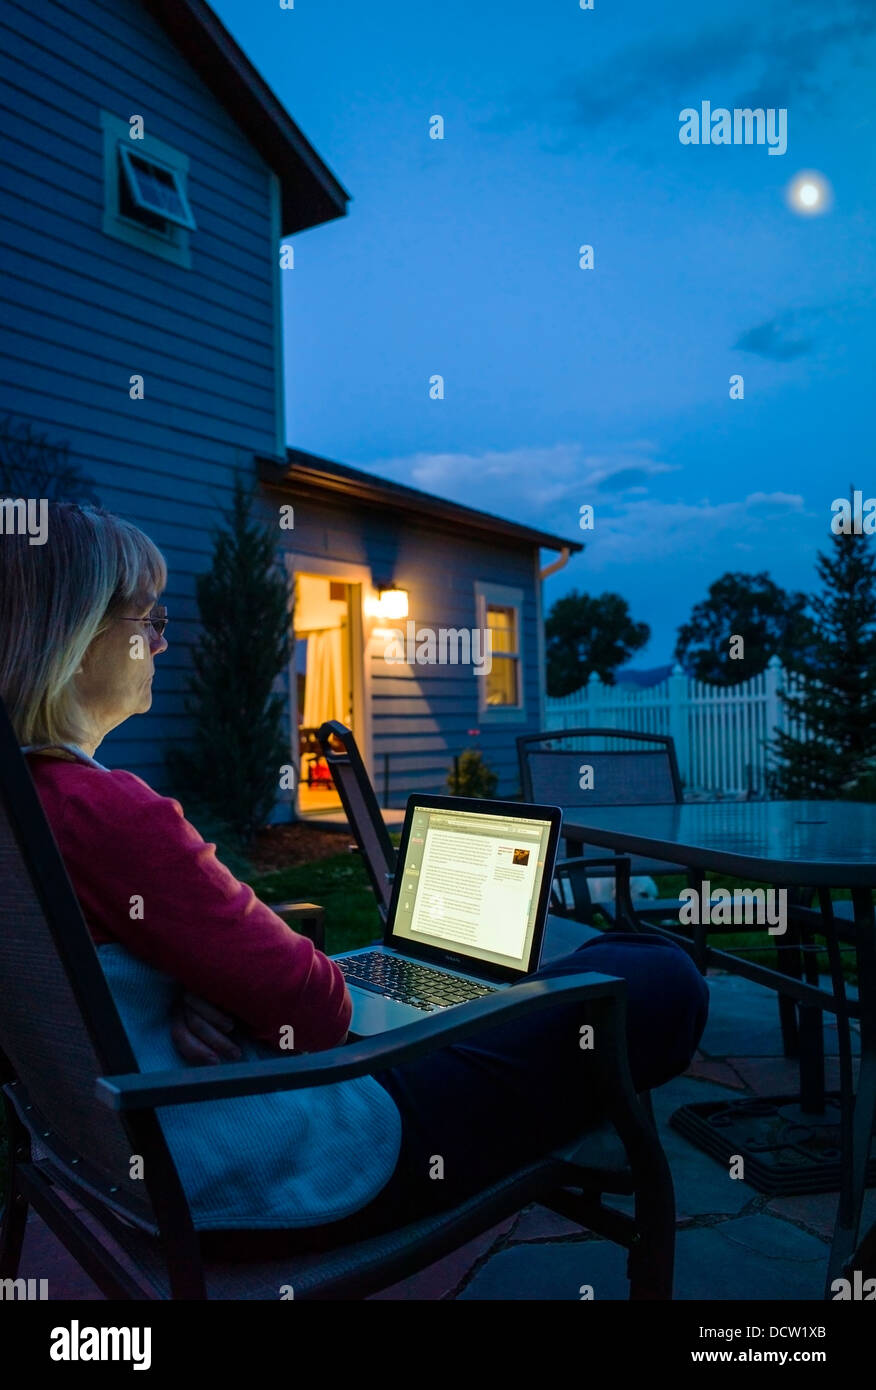 Woman working at home on laptop computer at dusk Stock Photo